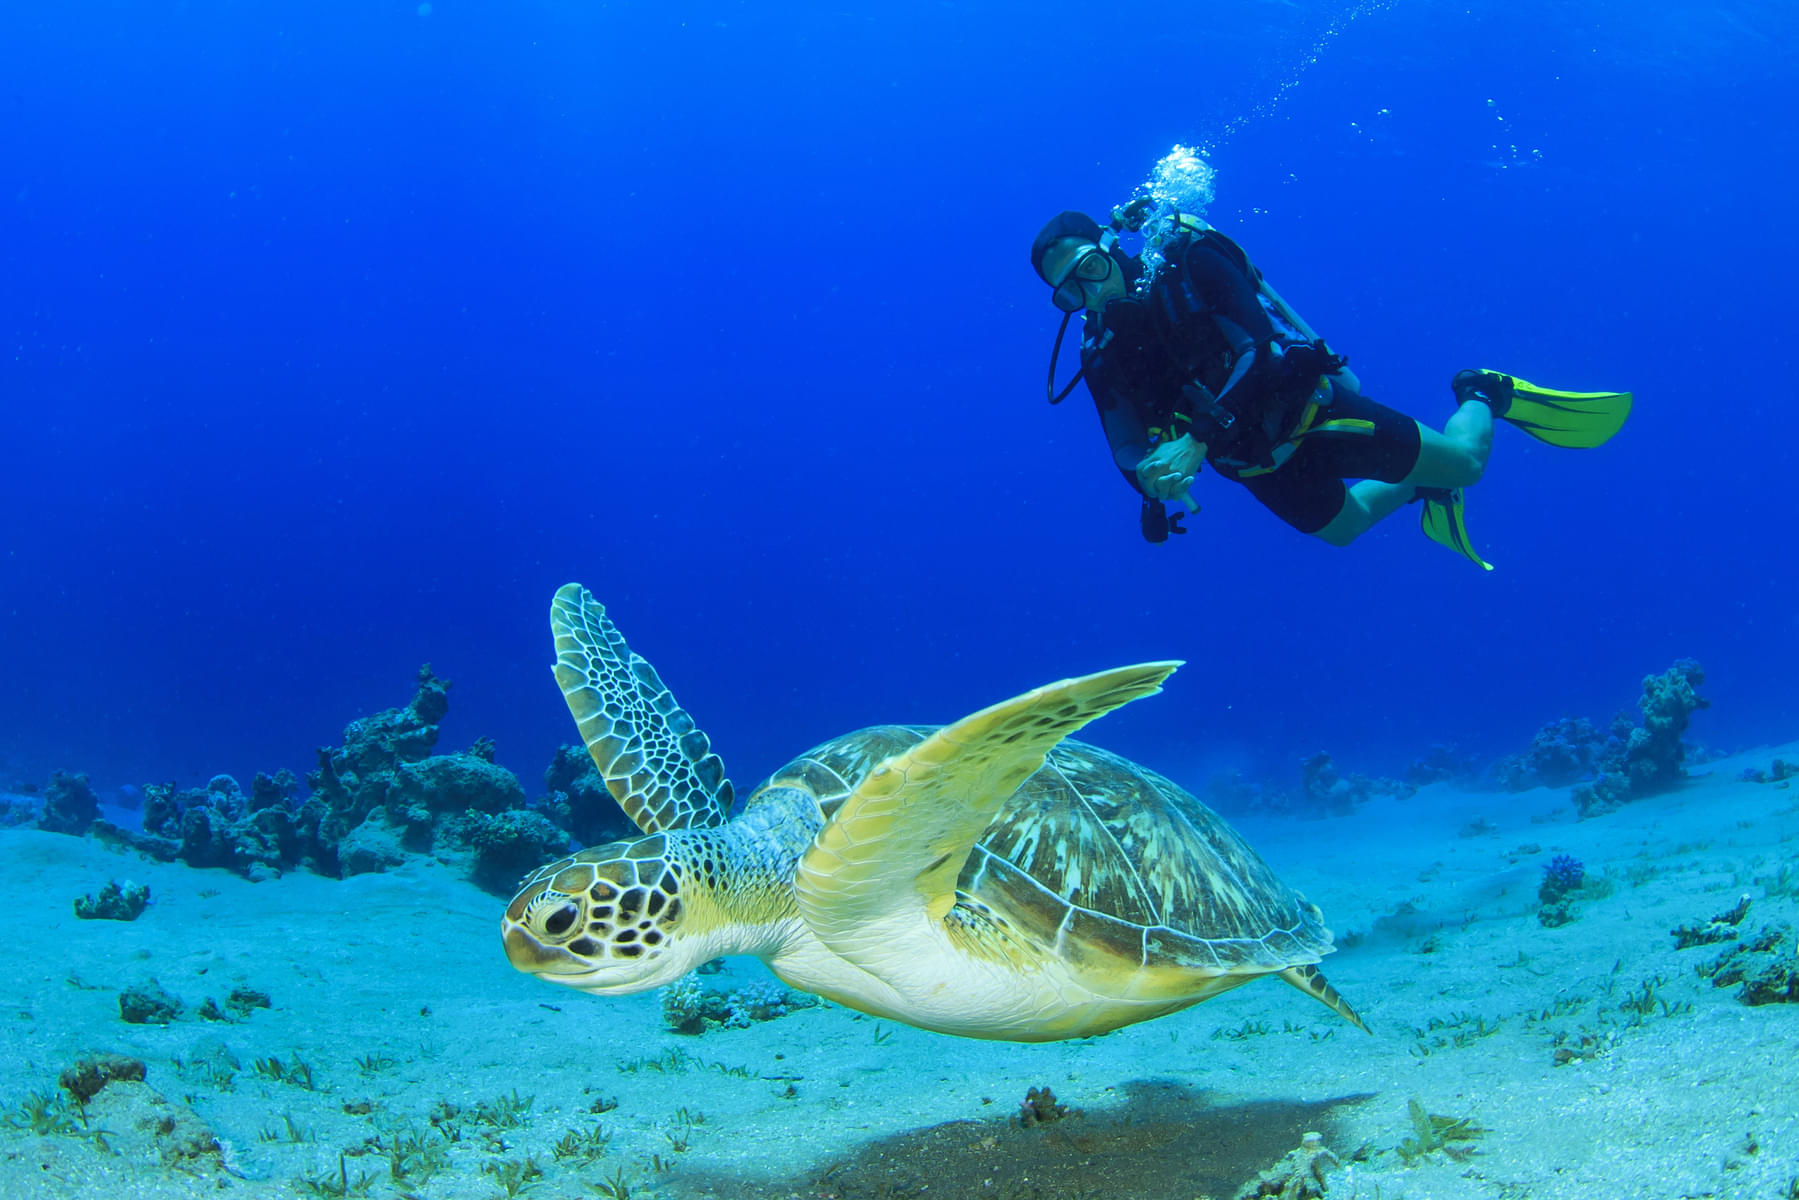 Chase a sea turtle